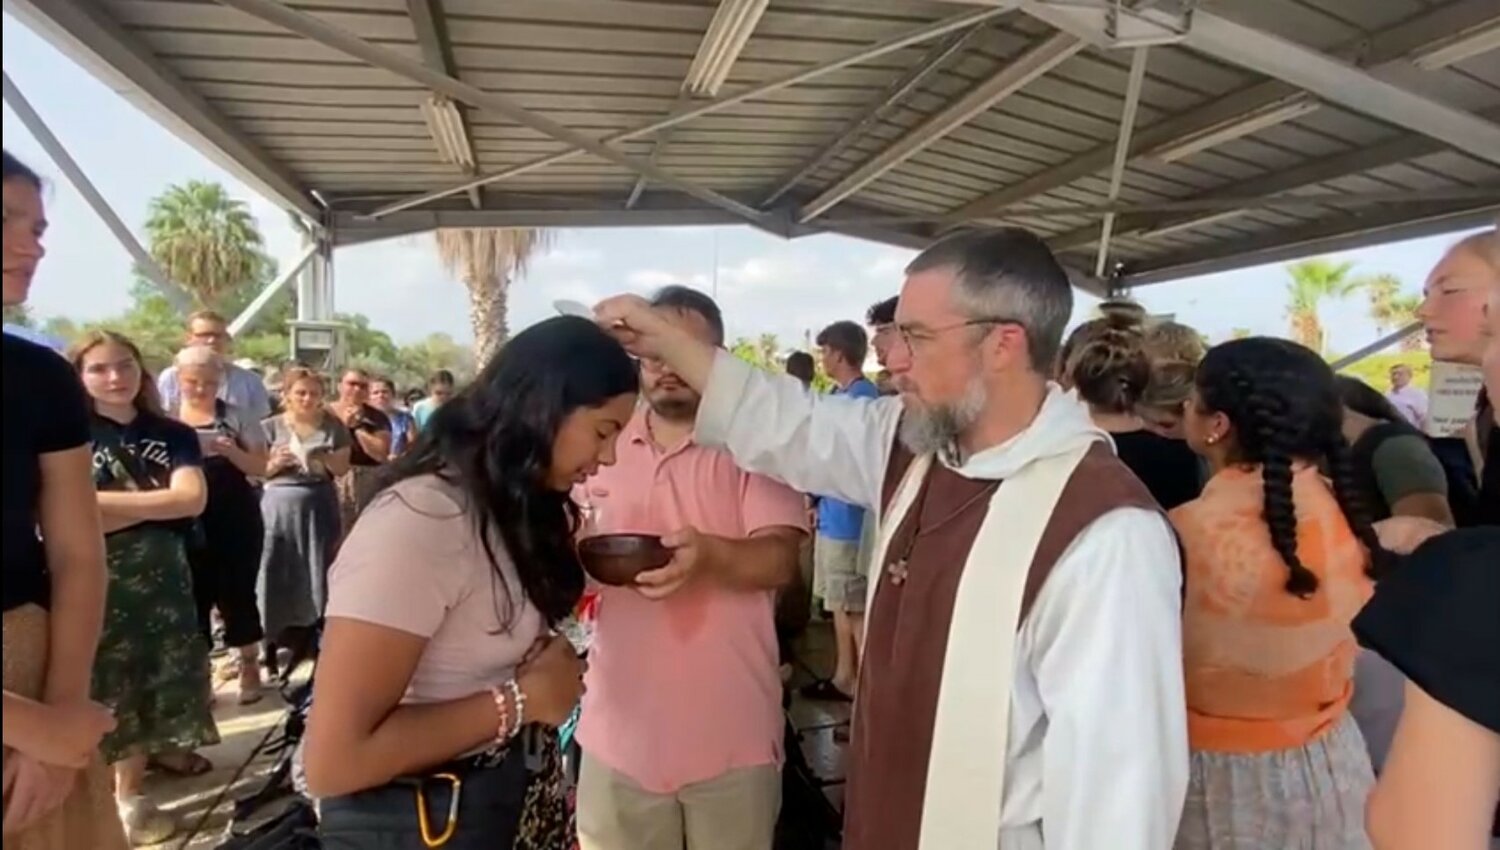 Father Anthony Ariniello, founder of the Community of the Beatitudes, who led the students on pilgrimage and served as their chaplain, renews the pilgrims’ Baptism while they waited in line for security screening at the Israel-Jordan border, on the way home from their shortened pilgrimage.